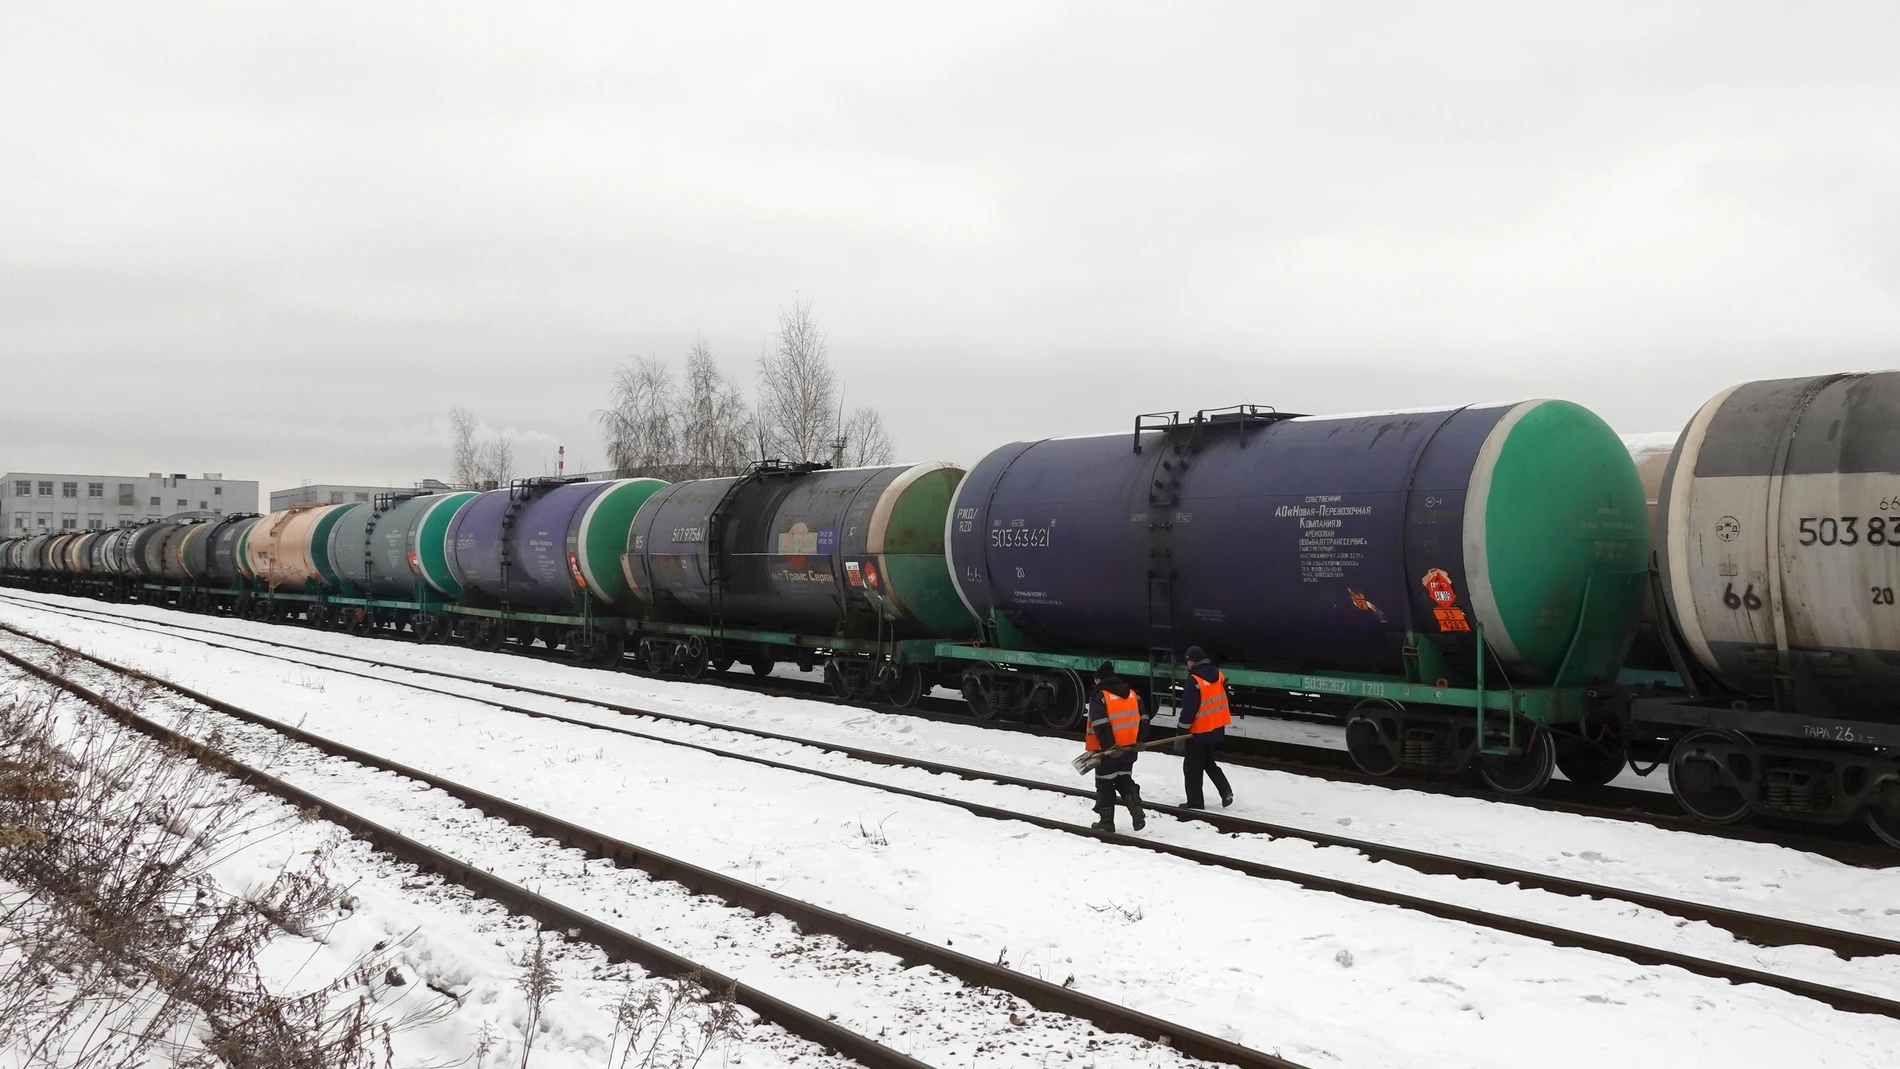 Moscow (Russian Federation), 06/02/2023.- Workers walk in front of railway tankers carrying oil products outside Moscow, Russia, 06 February 2023. On 24 February 2022 Russian troops entered Ukrainian territory in what the Russian president declared a 'Special Military Operation', resulting in multiple sanctions against Russia, including sanctions against the oil industry. (Rusia, Moscú) EFE/EPA/MAXIM SHIPENKOV 